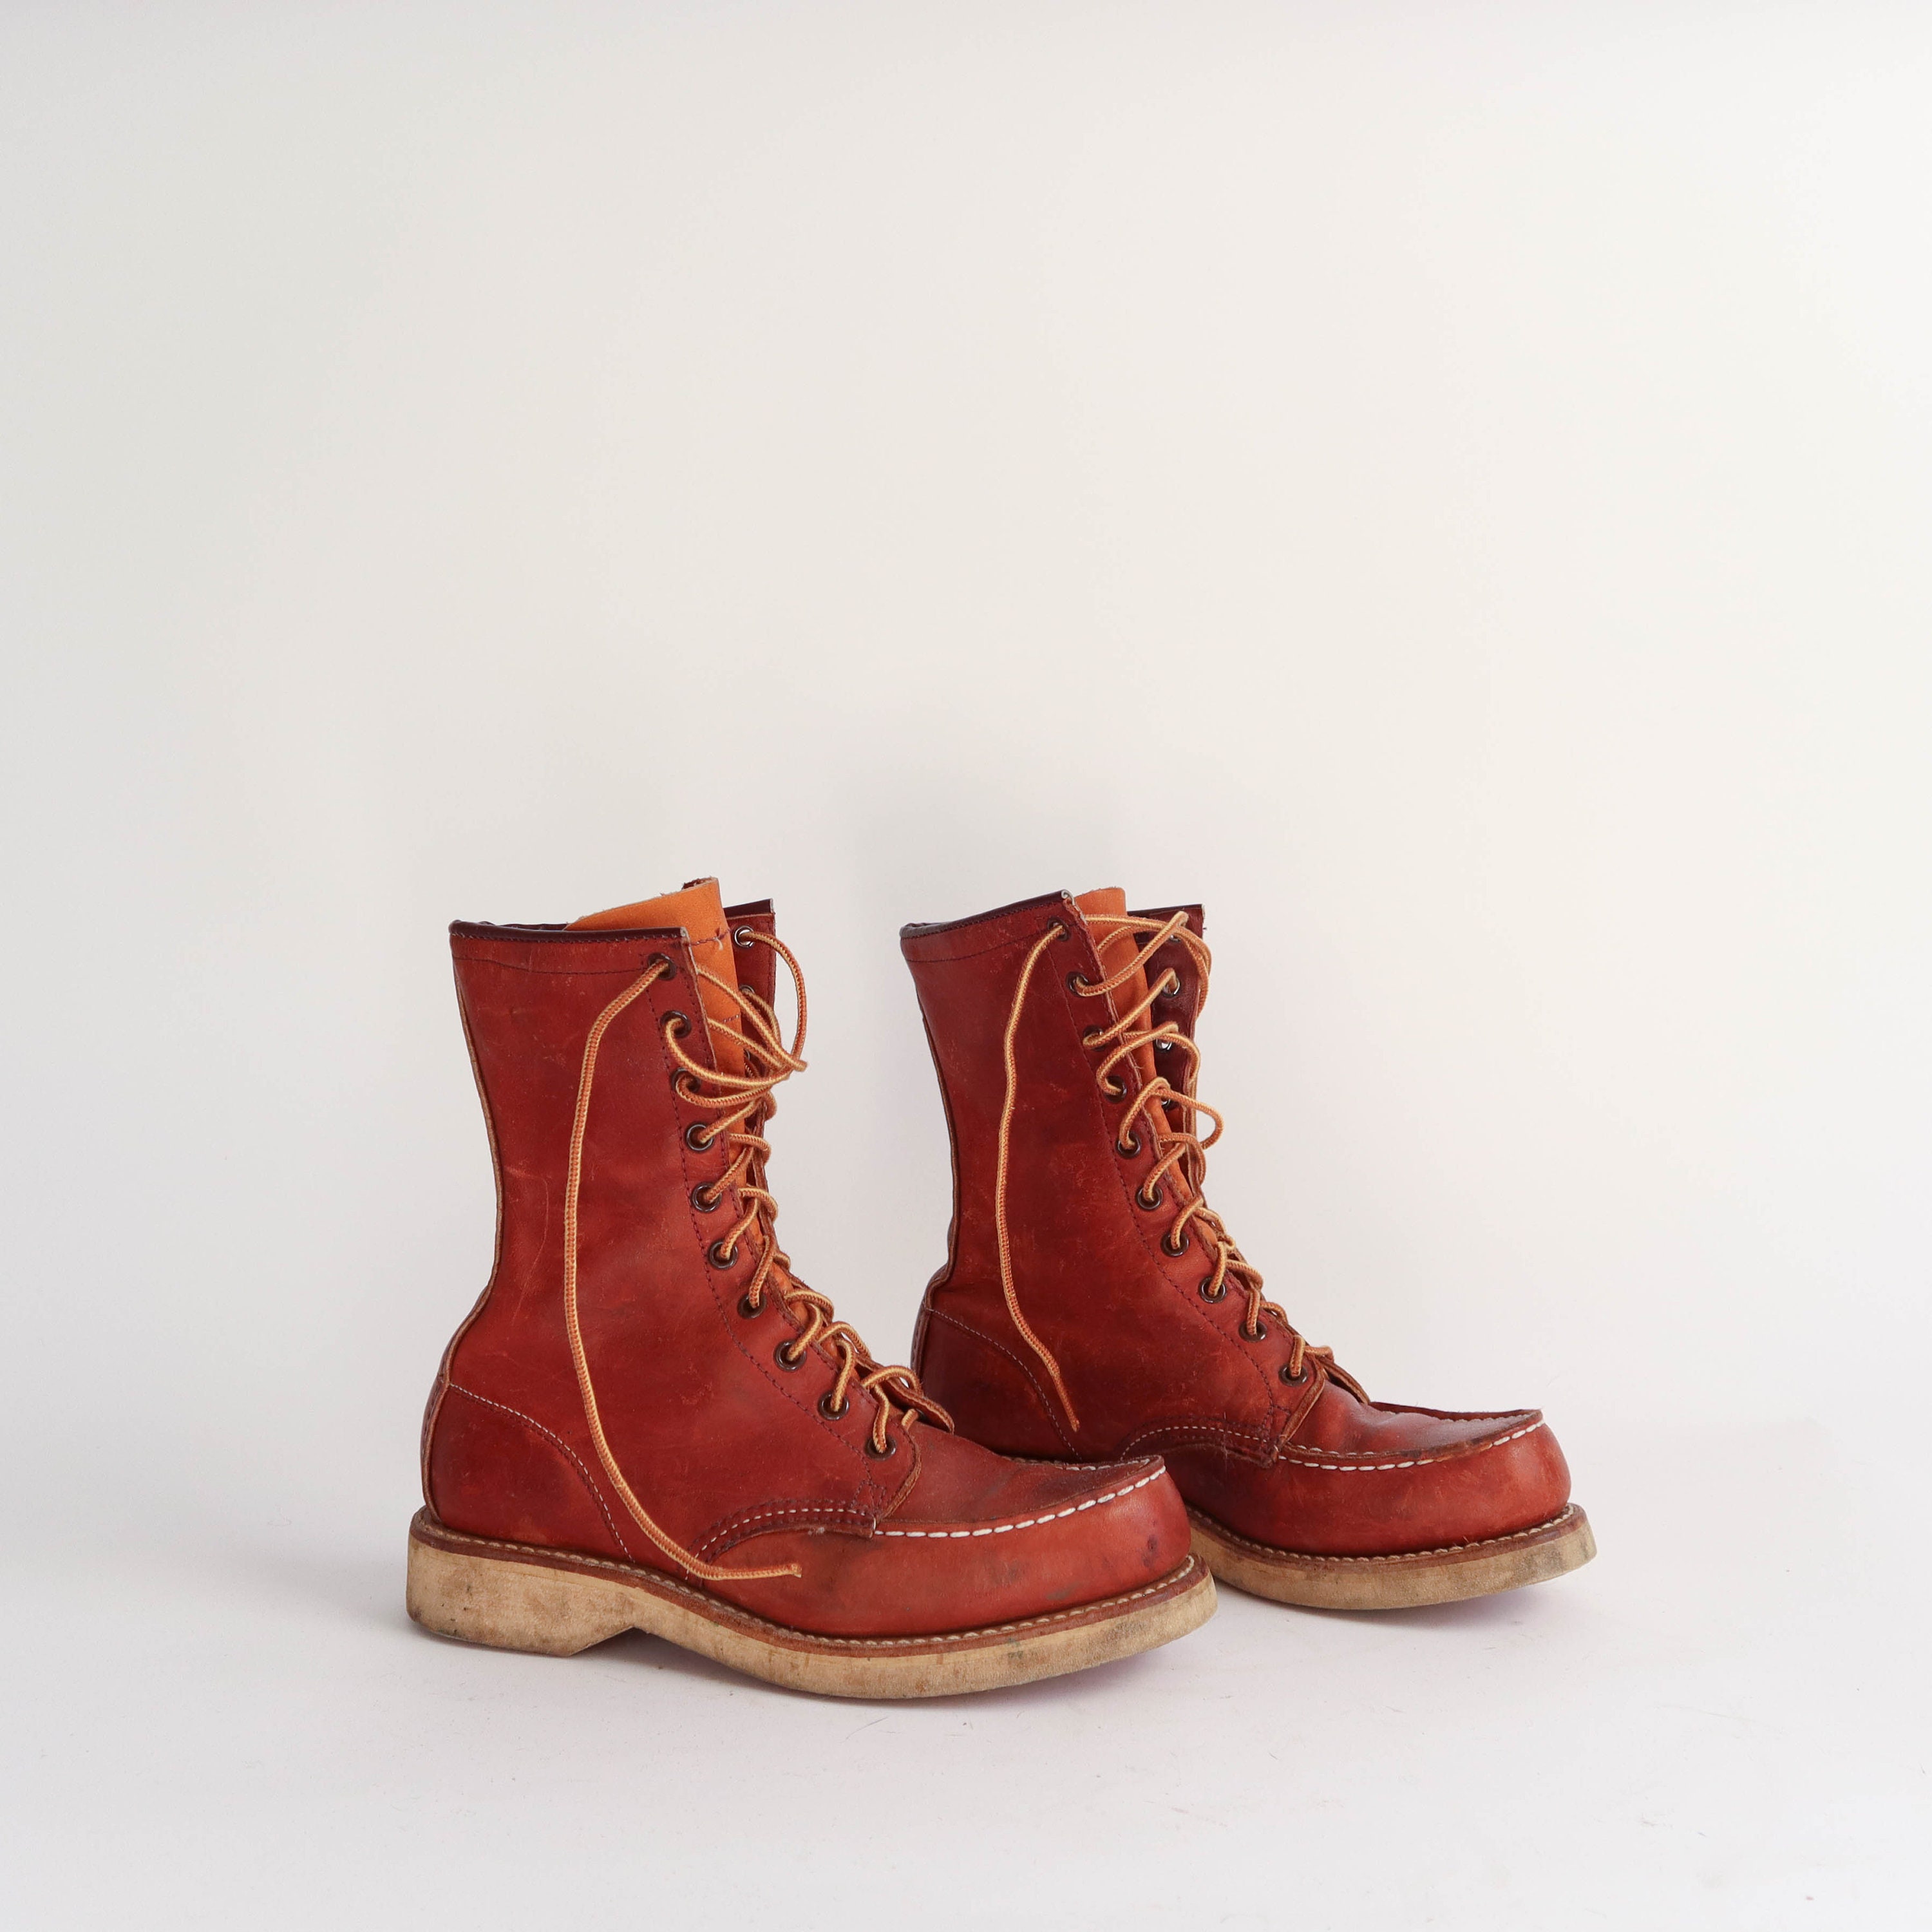 hudson bay shoes and boots